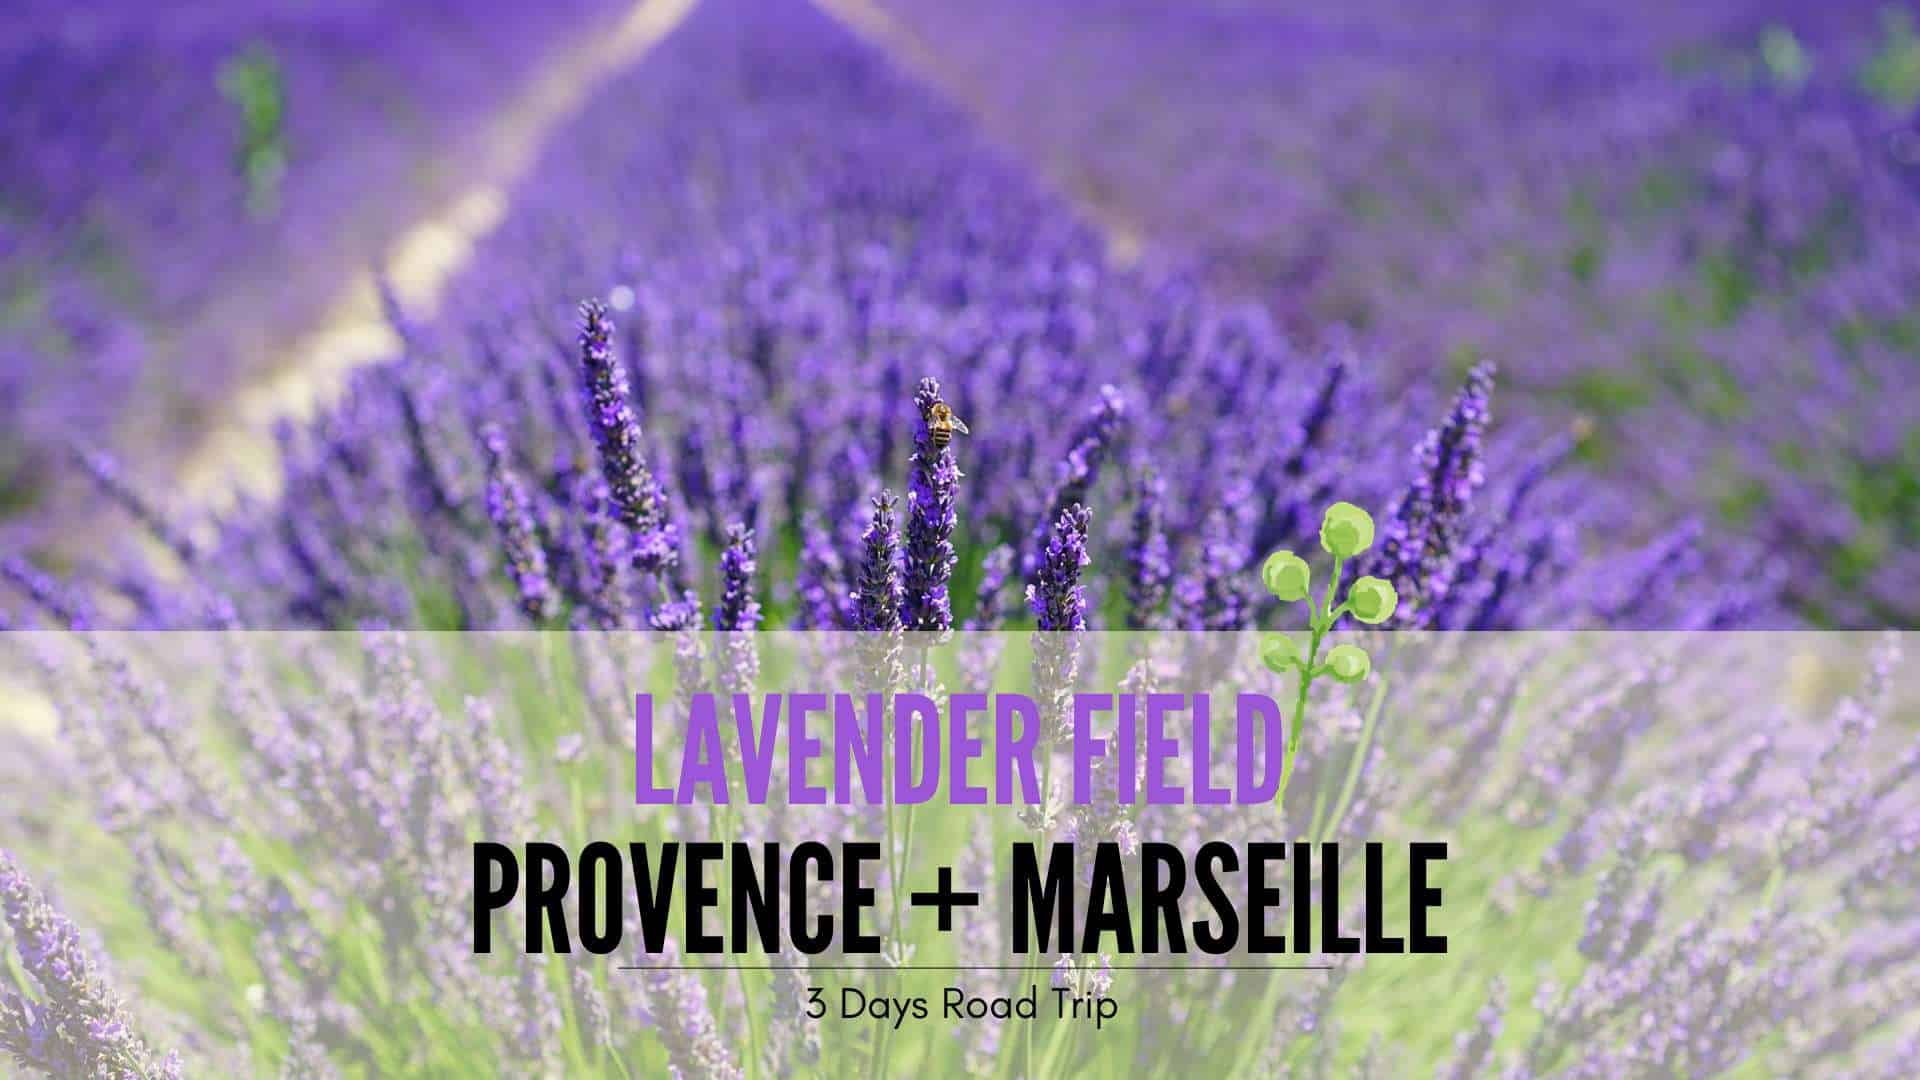 3 Days Itinerary Road Trip – Lavender @ Provence and Marseille - Singapore Travel ...1920 x 1080